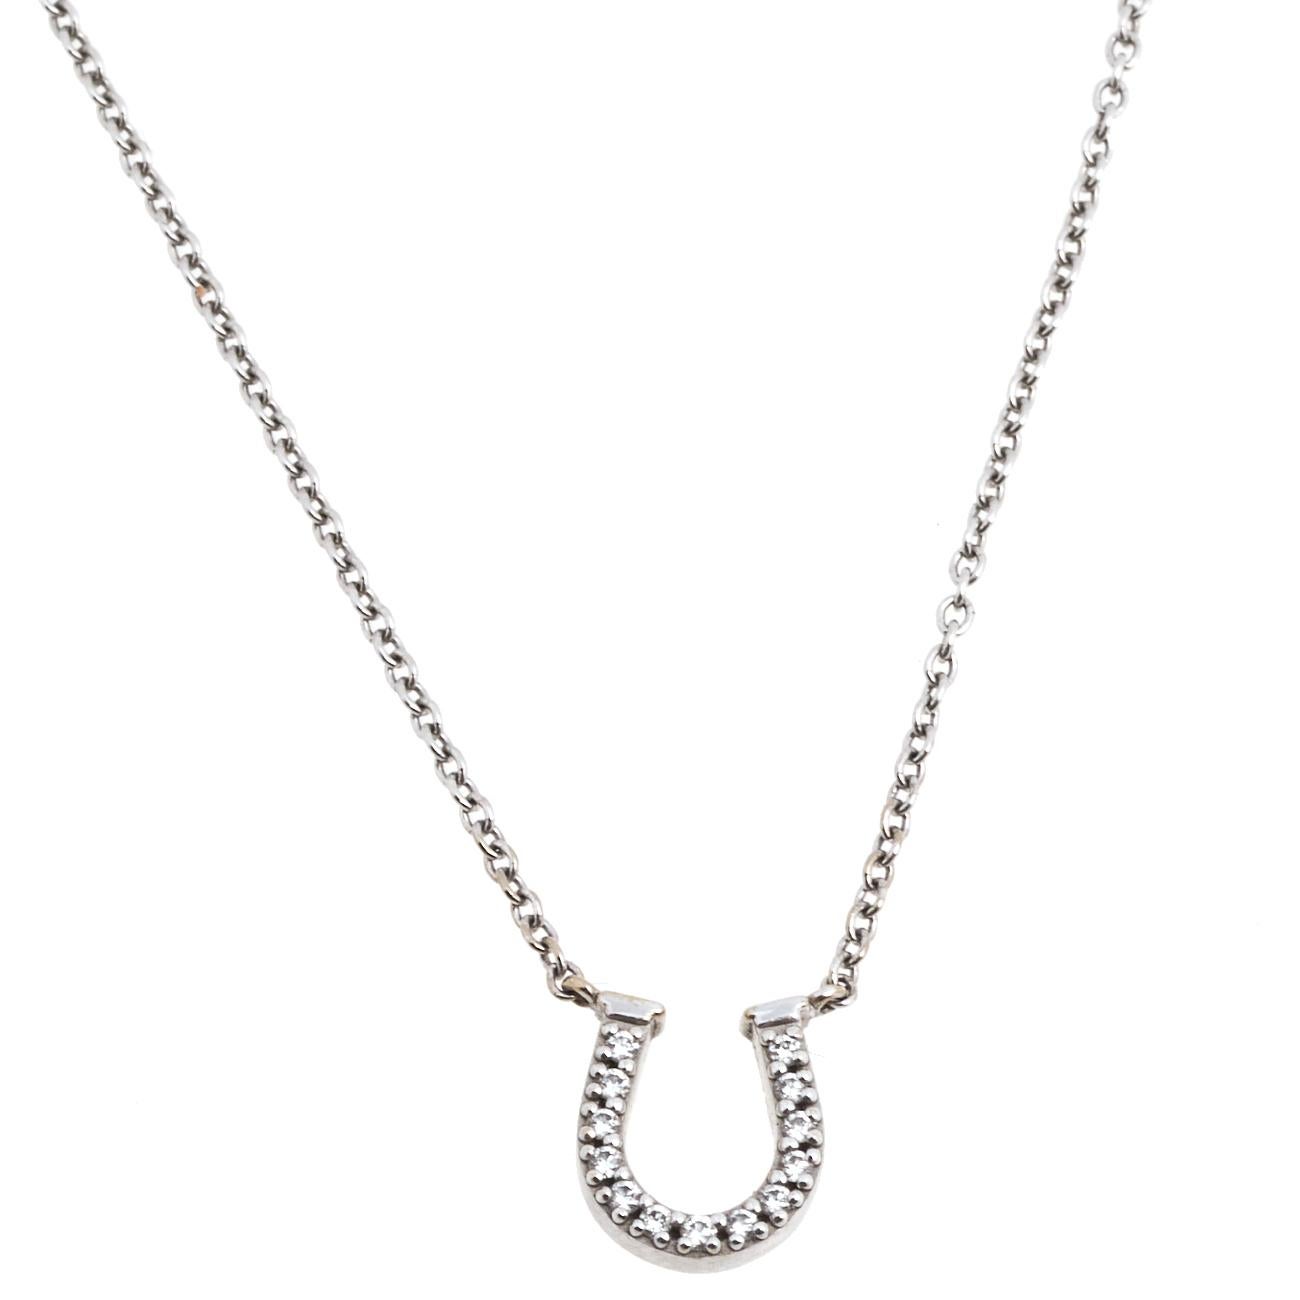 This breathtaking necklace from Tiffany & Co. is designed with the true spirit of perfection. One can see the harmonious fusion of gemstones with contemporary charm in every detail. Sculpted using precious 18k white gold, the necklace features a